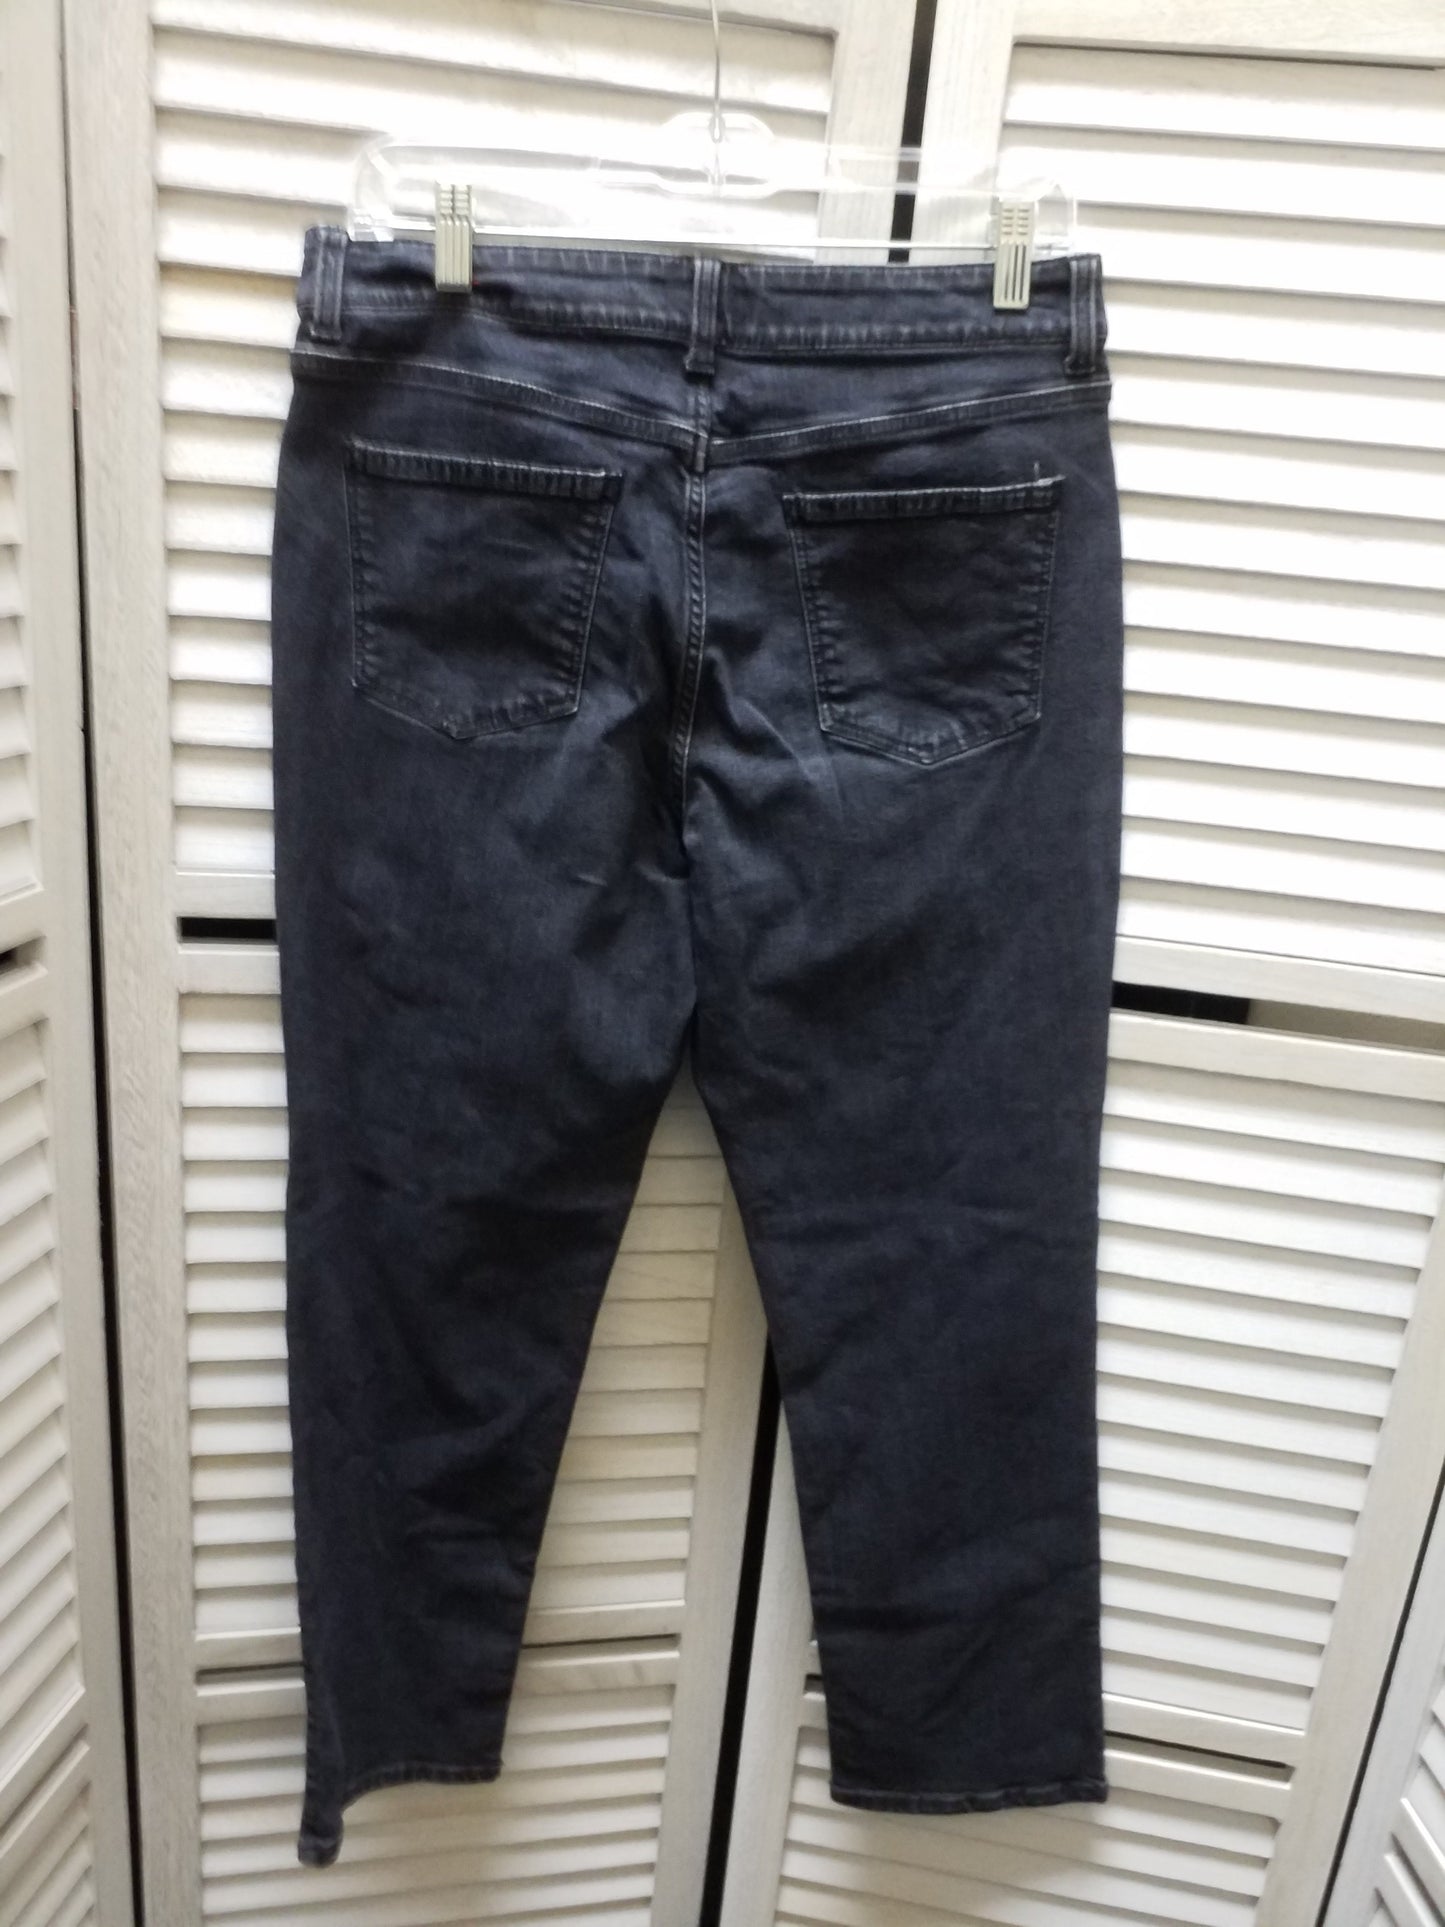 Jeans Skinny By Talbots  Size: 10petite